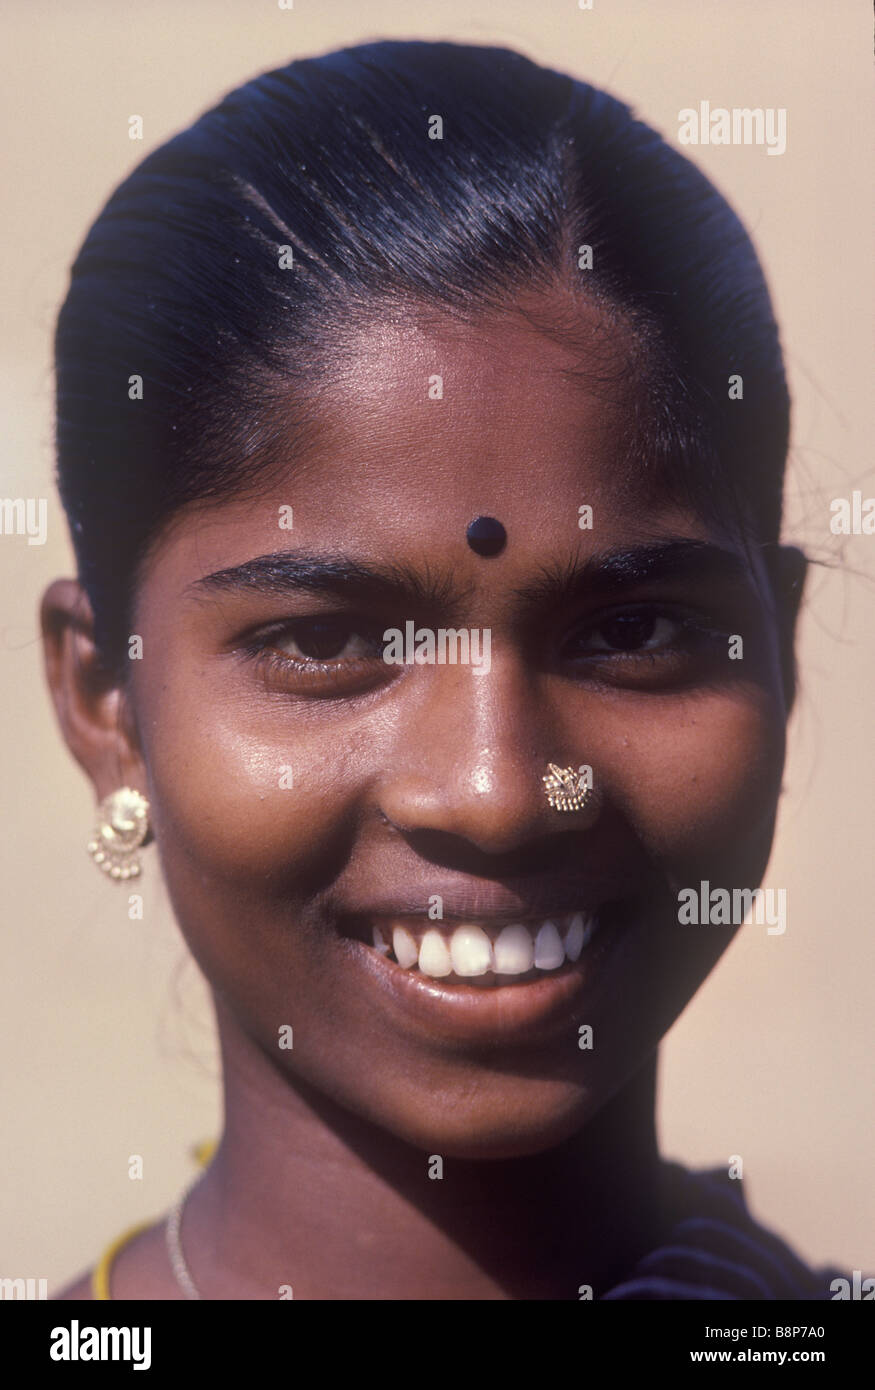 Tamil woman living in wooden shelters on the beach Sri Lanka. Portrait. Circa 1995. HOMER SYKES Stock Photo